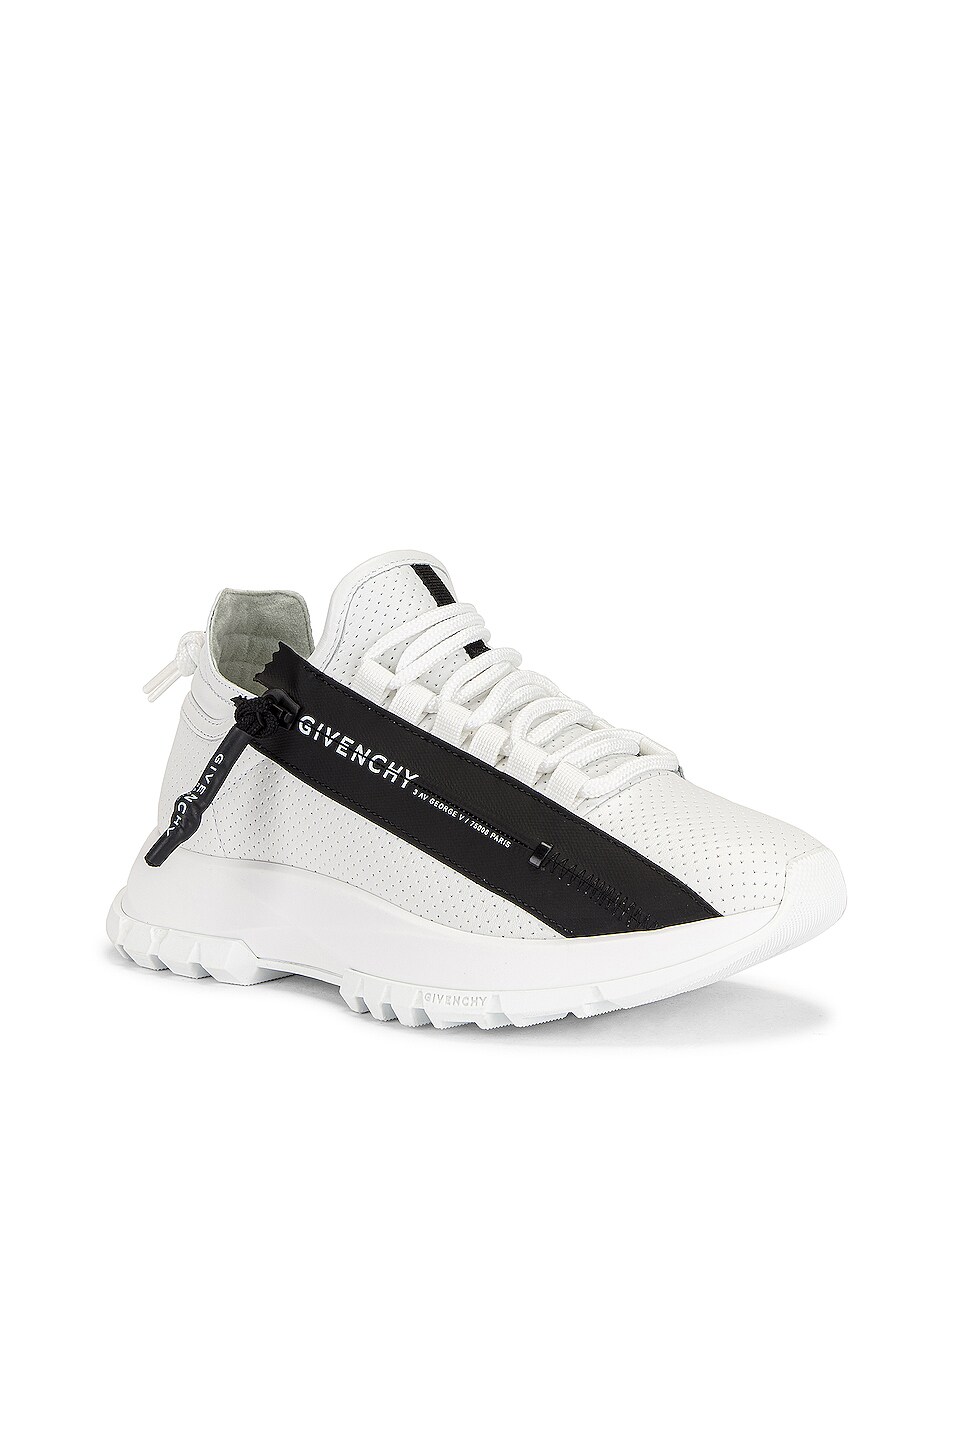 Givenchy Spectre Low Runner Zip Sneakers in White & Black | FWRD